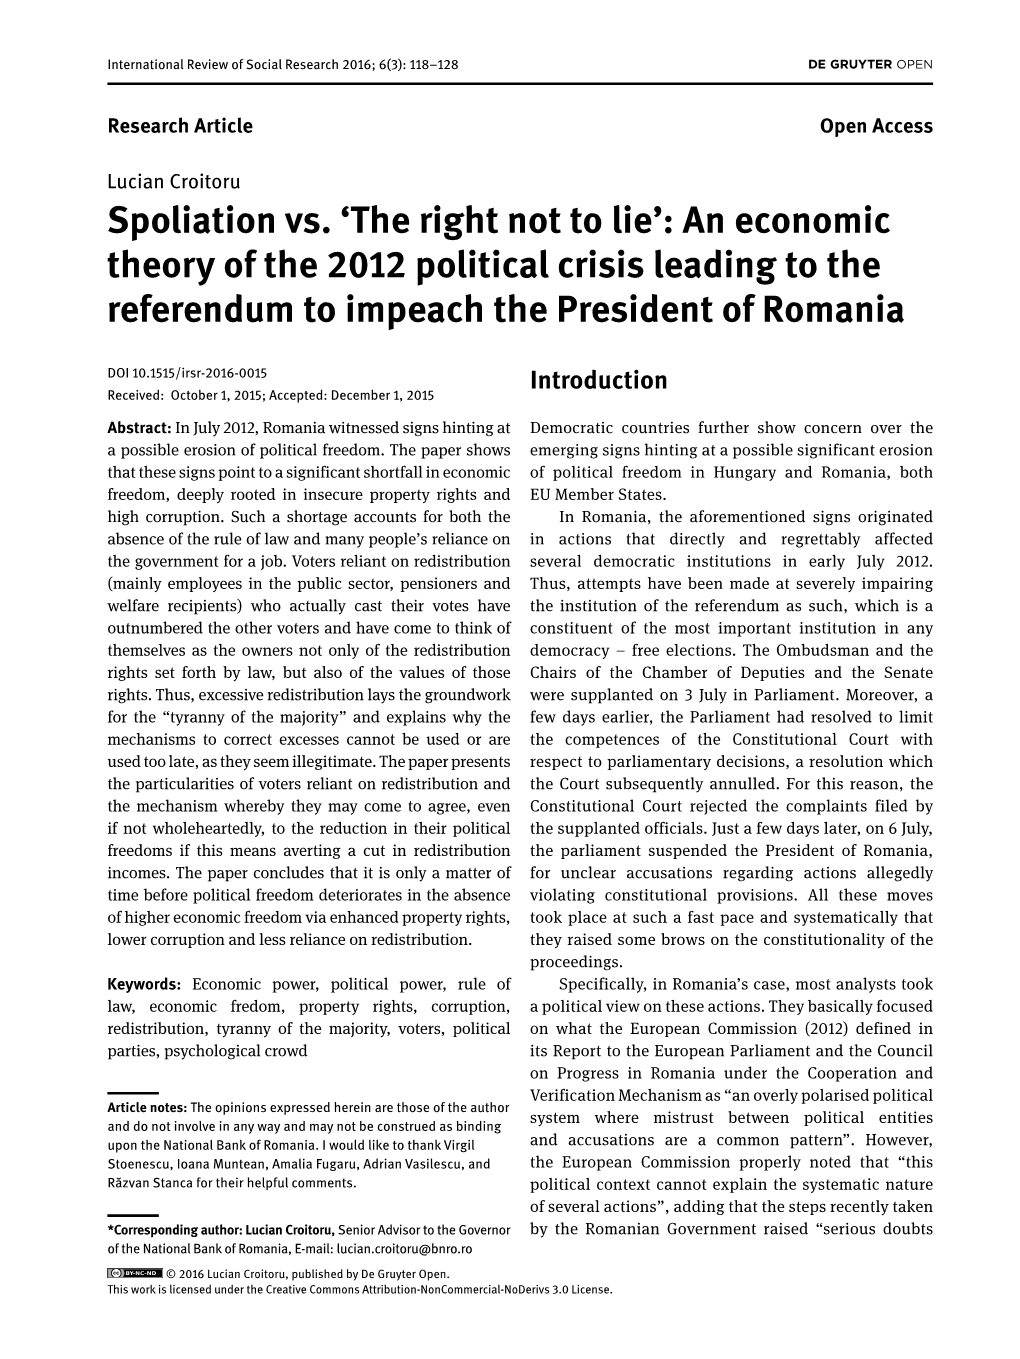 Spoliation Vs. 'The Right Not to Lie': an Economic Theory of the 2012